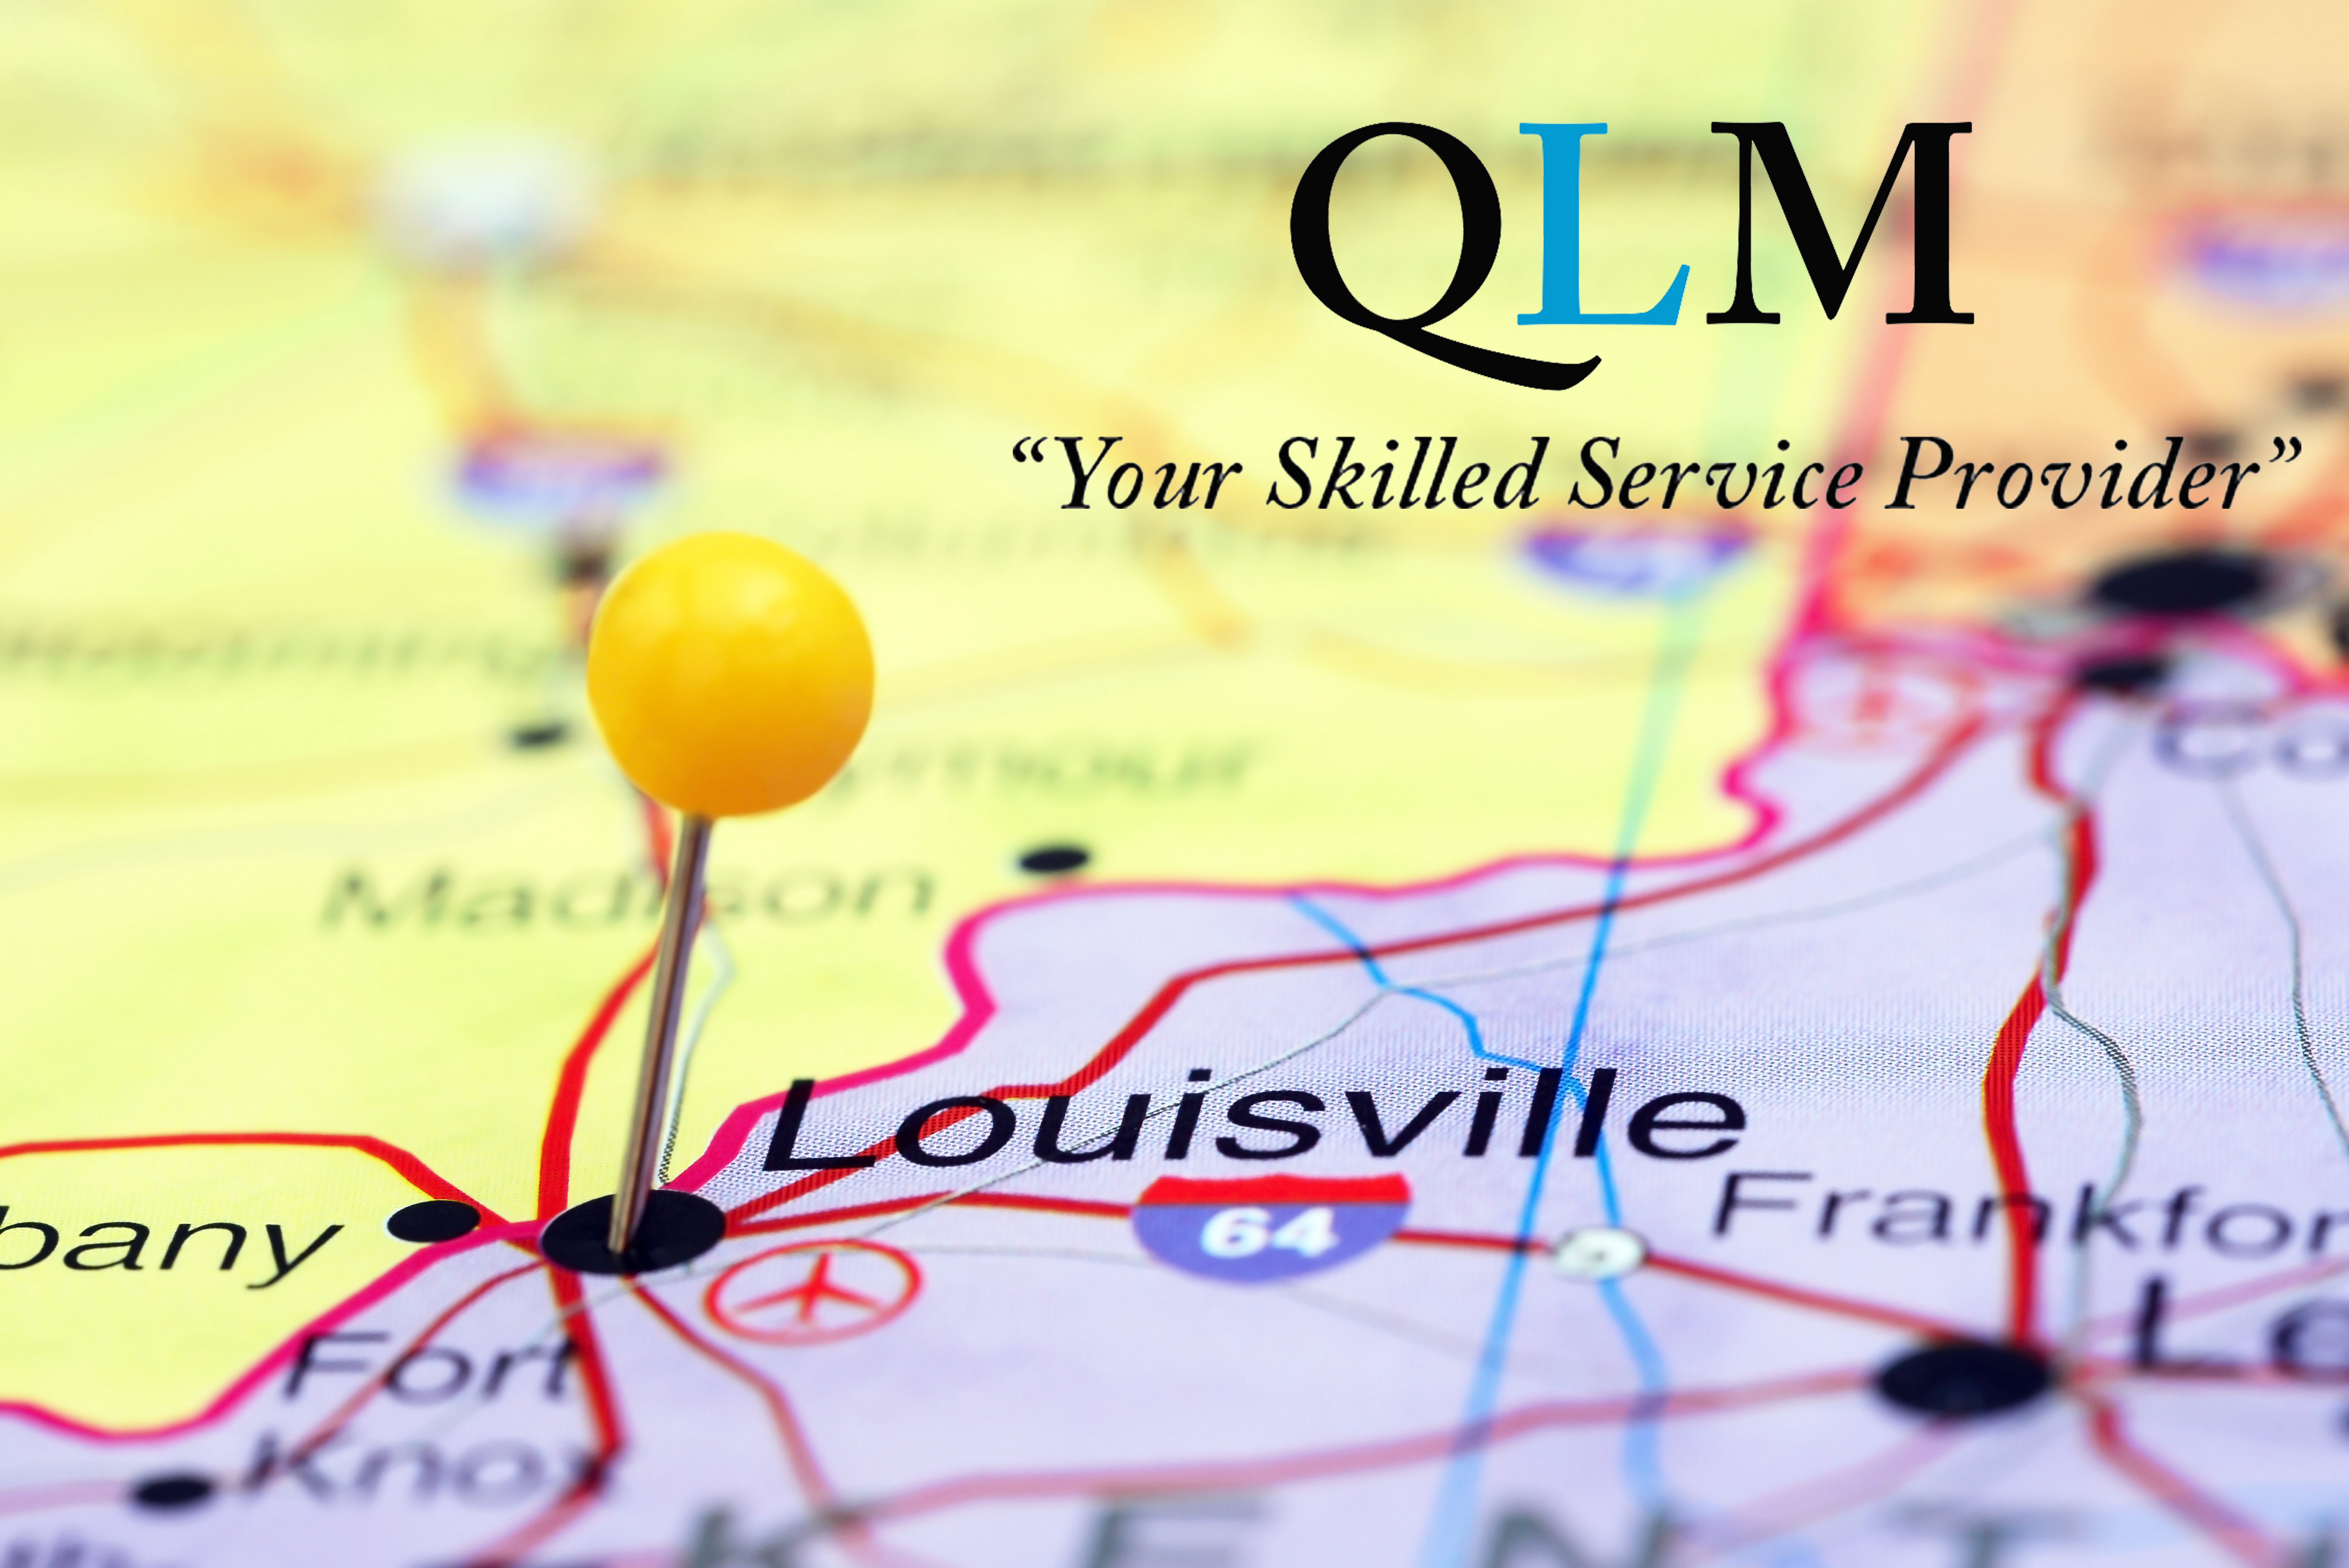 QLM brings the best of staffing to Kentucky area.